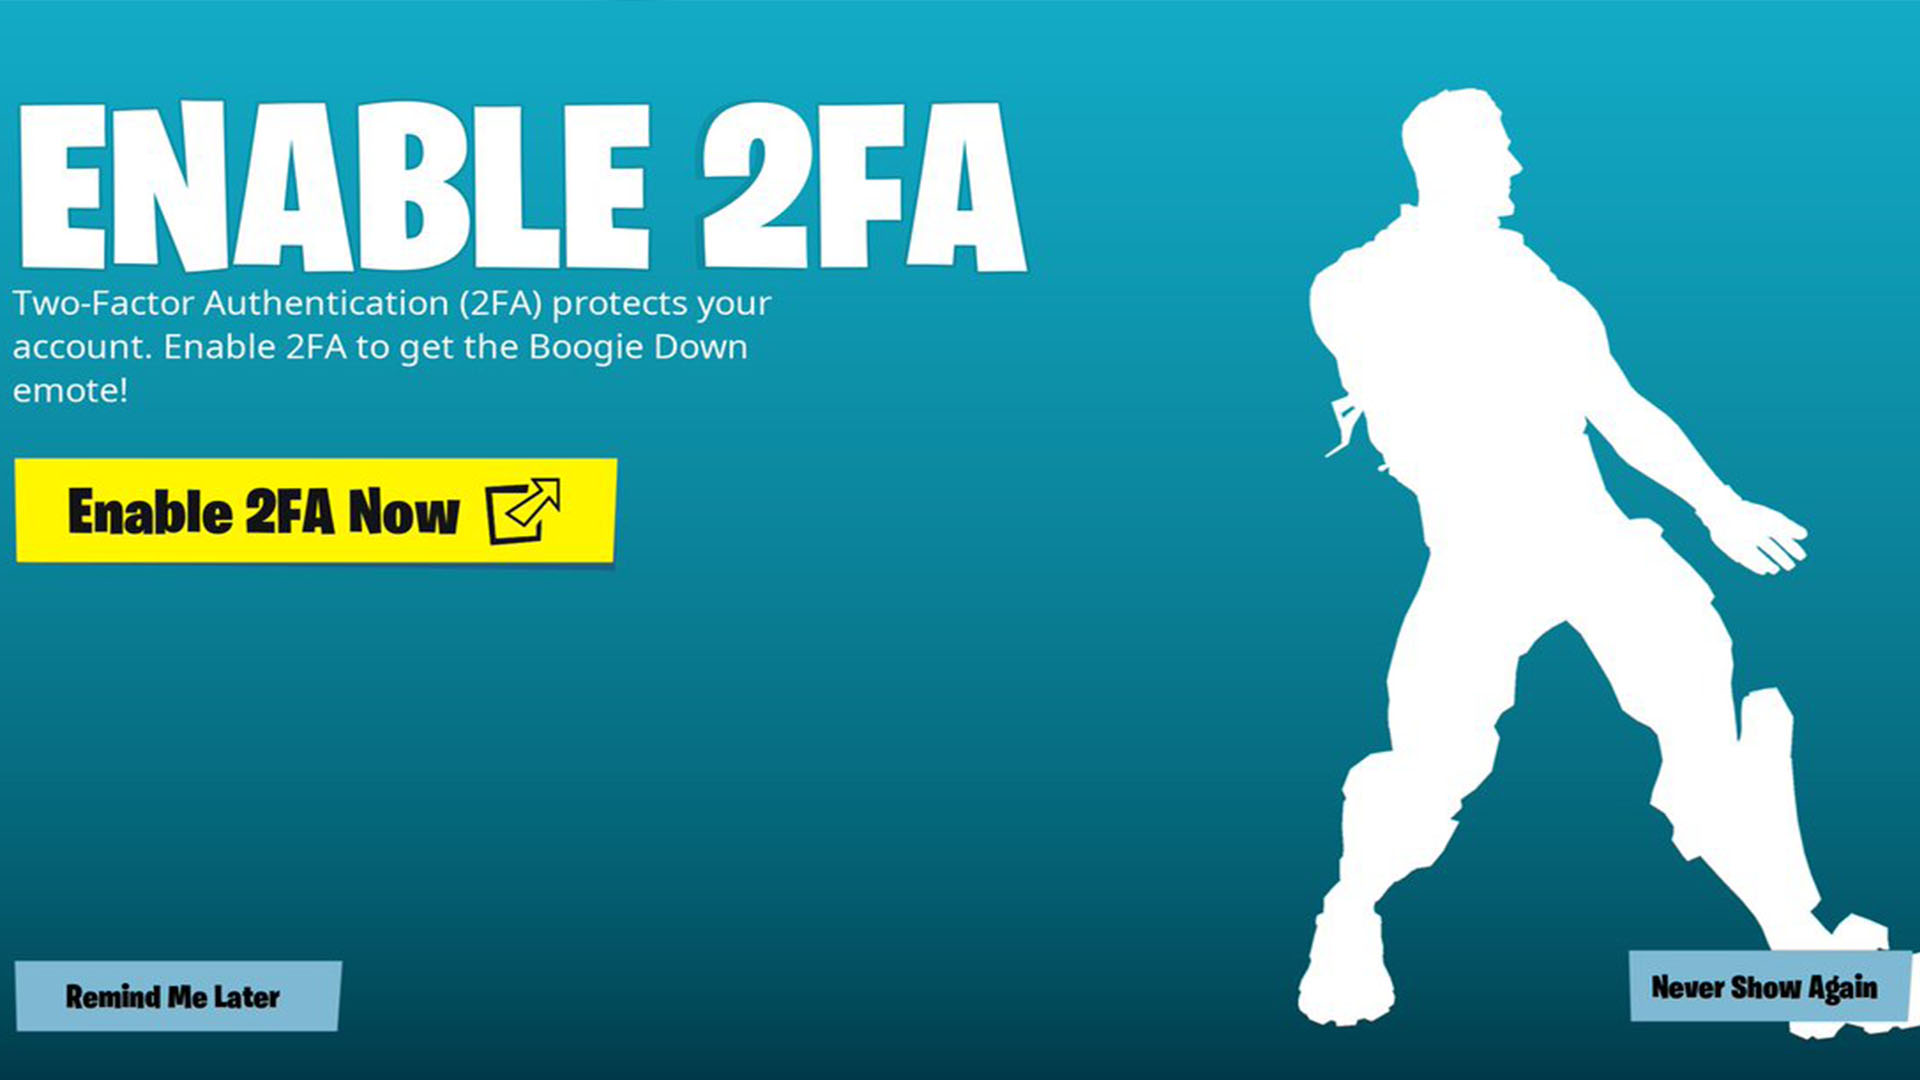 How To Enable Fortnite 2fa And Unlock The Boogie Down Emote - how to enable fortnite 2fa and unlock the boogie down emote gamesradar